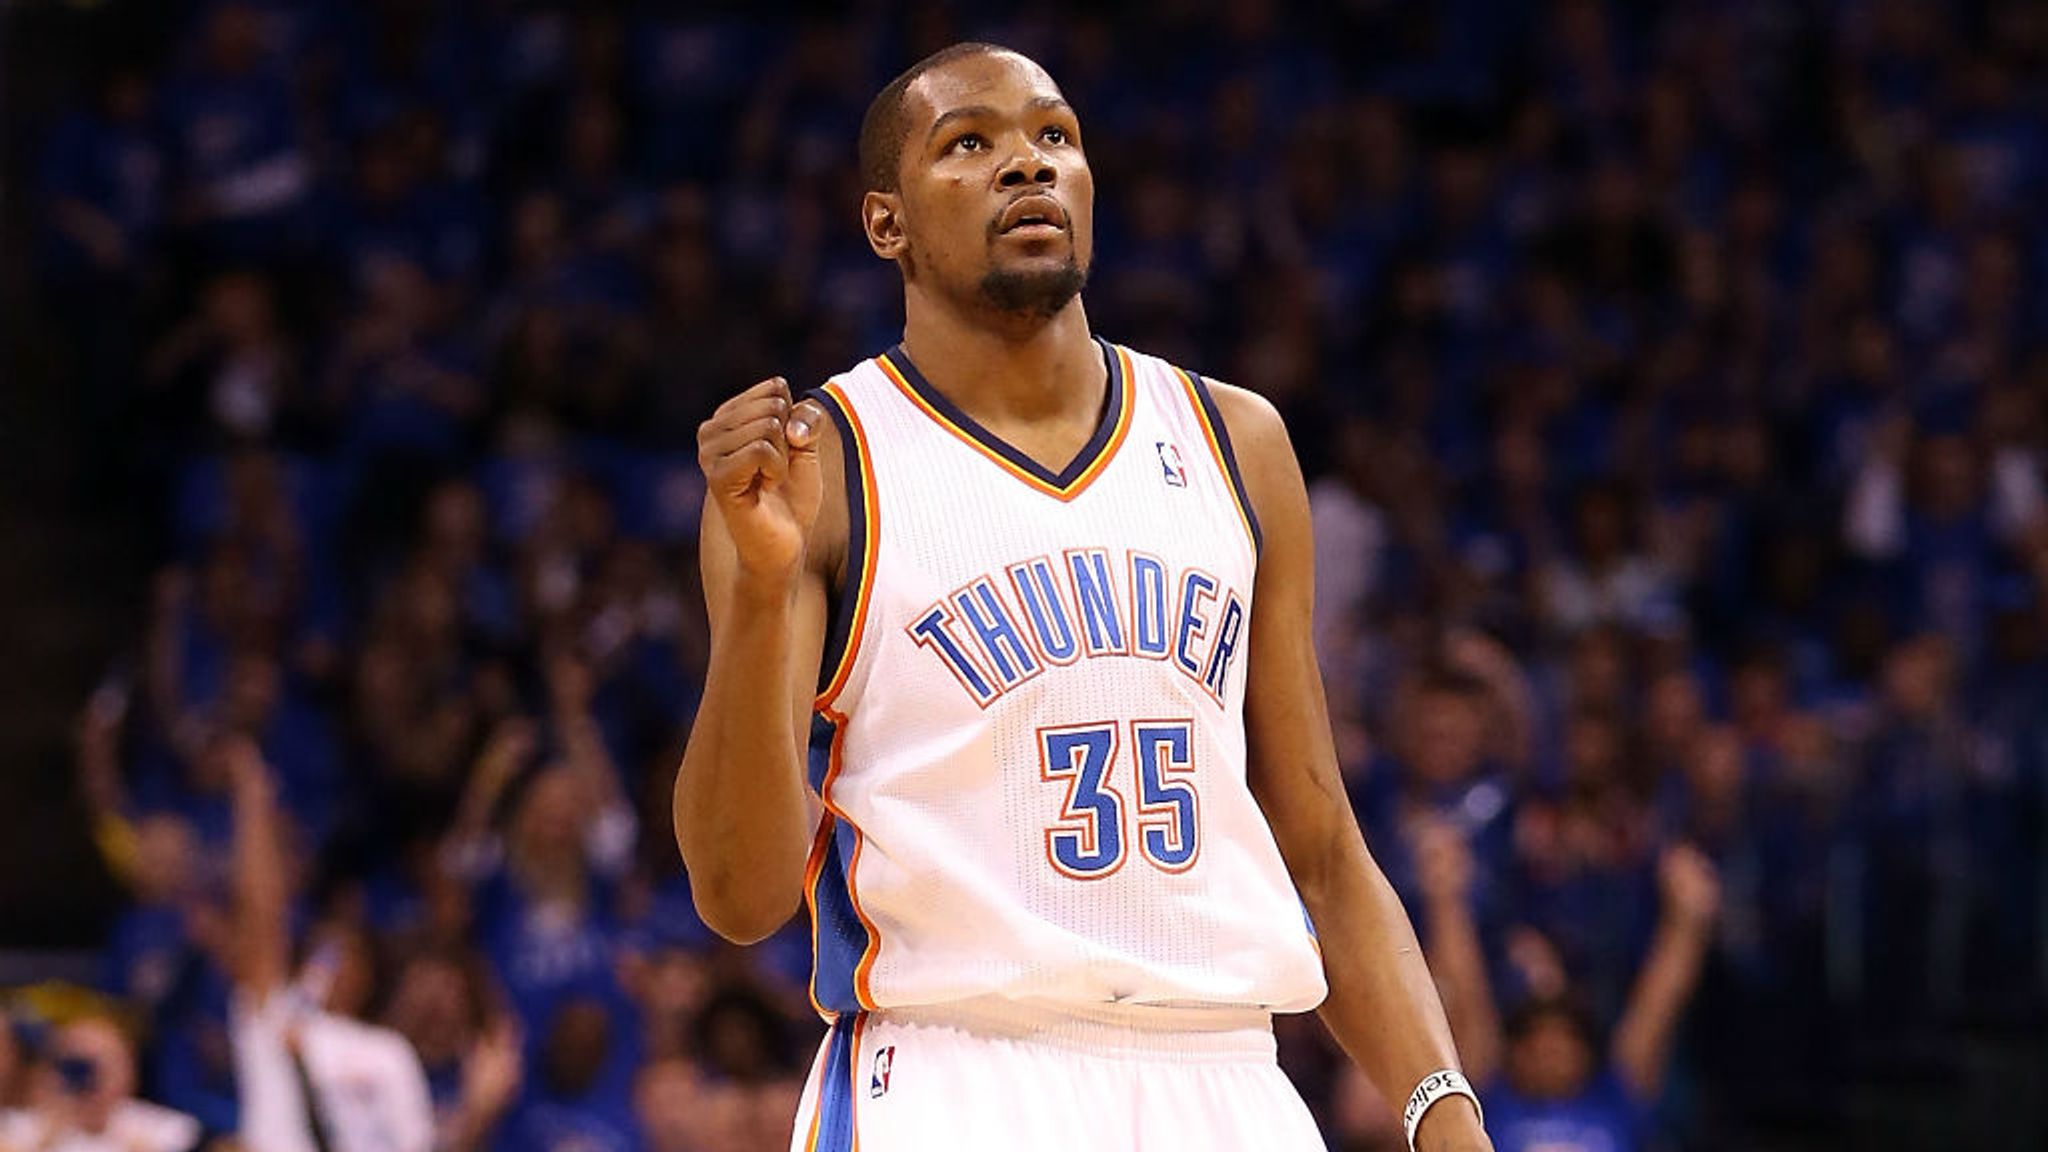 Oklahoma City Thunder Team News, Fixtures and Results